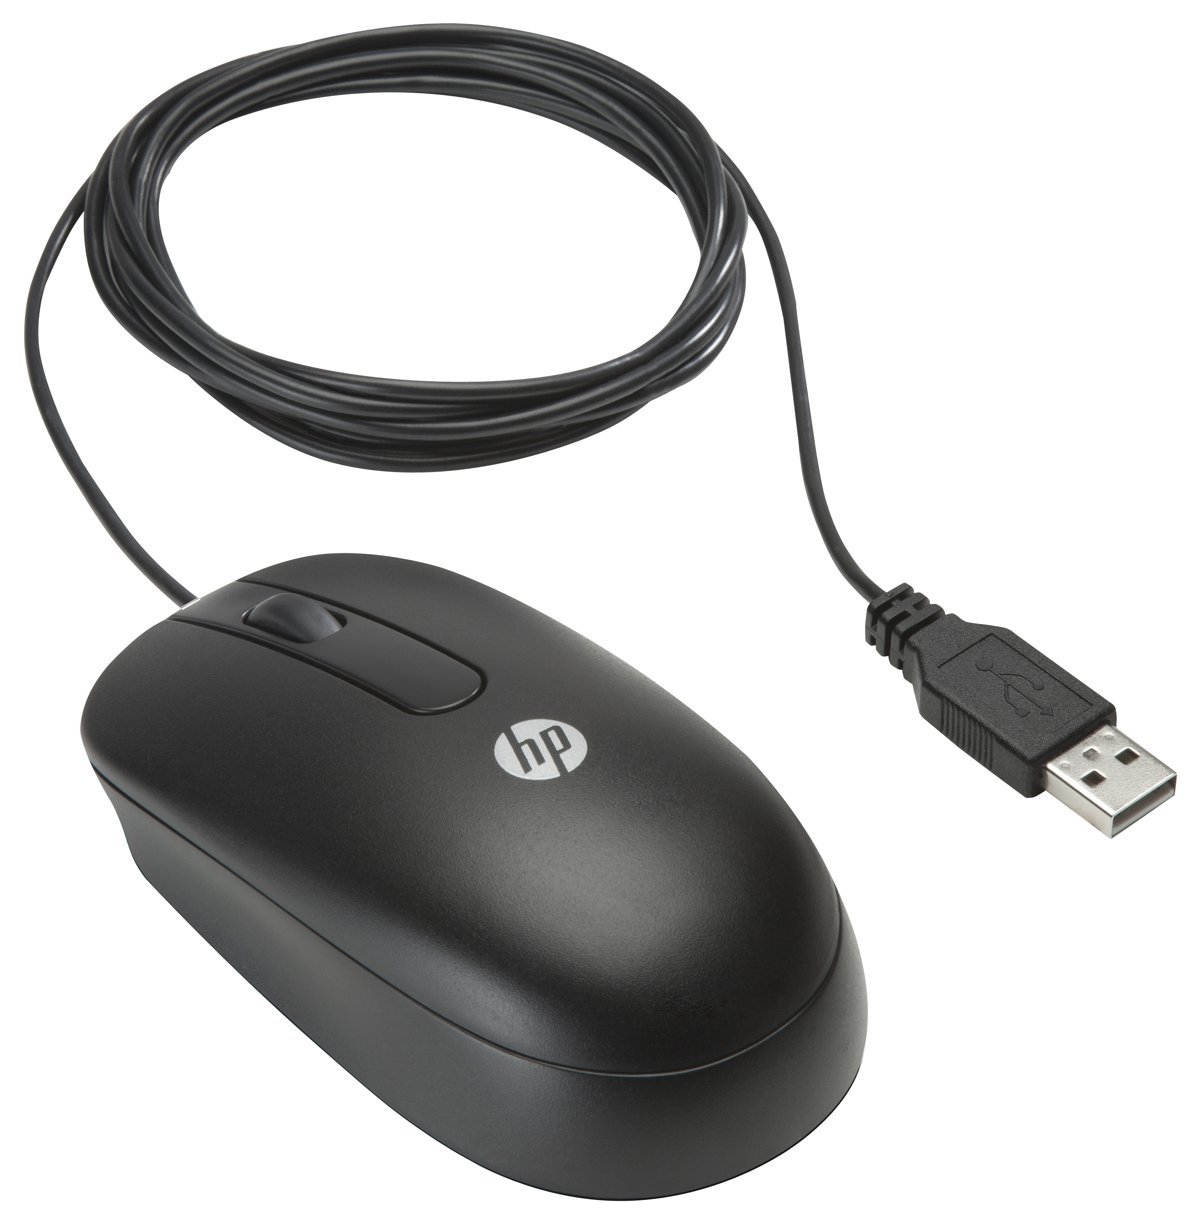 slide 2 of 2, show larger image, hp usb optical scroll mouse